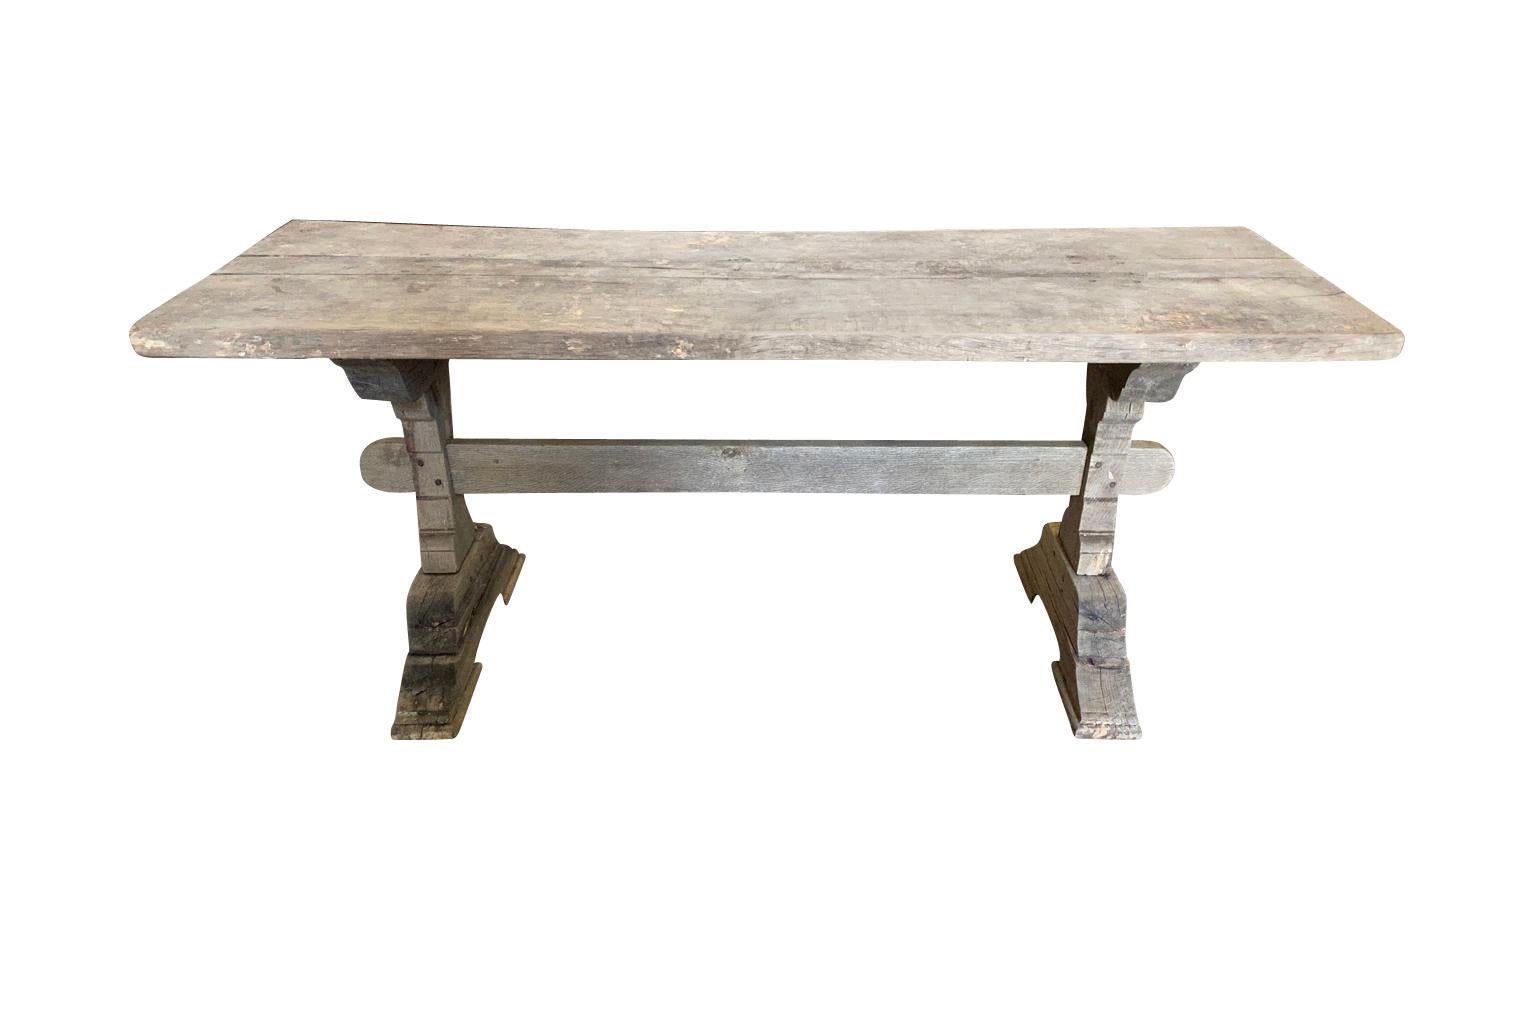 A very charming early 20th century Console Table - Trestle Table from the Provence region of France.  Soundly constructed from naturally washed beech wood.  Beautiful patina.